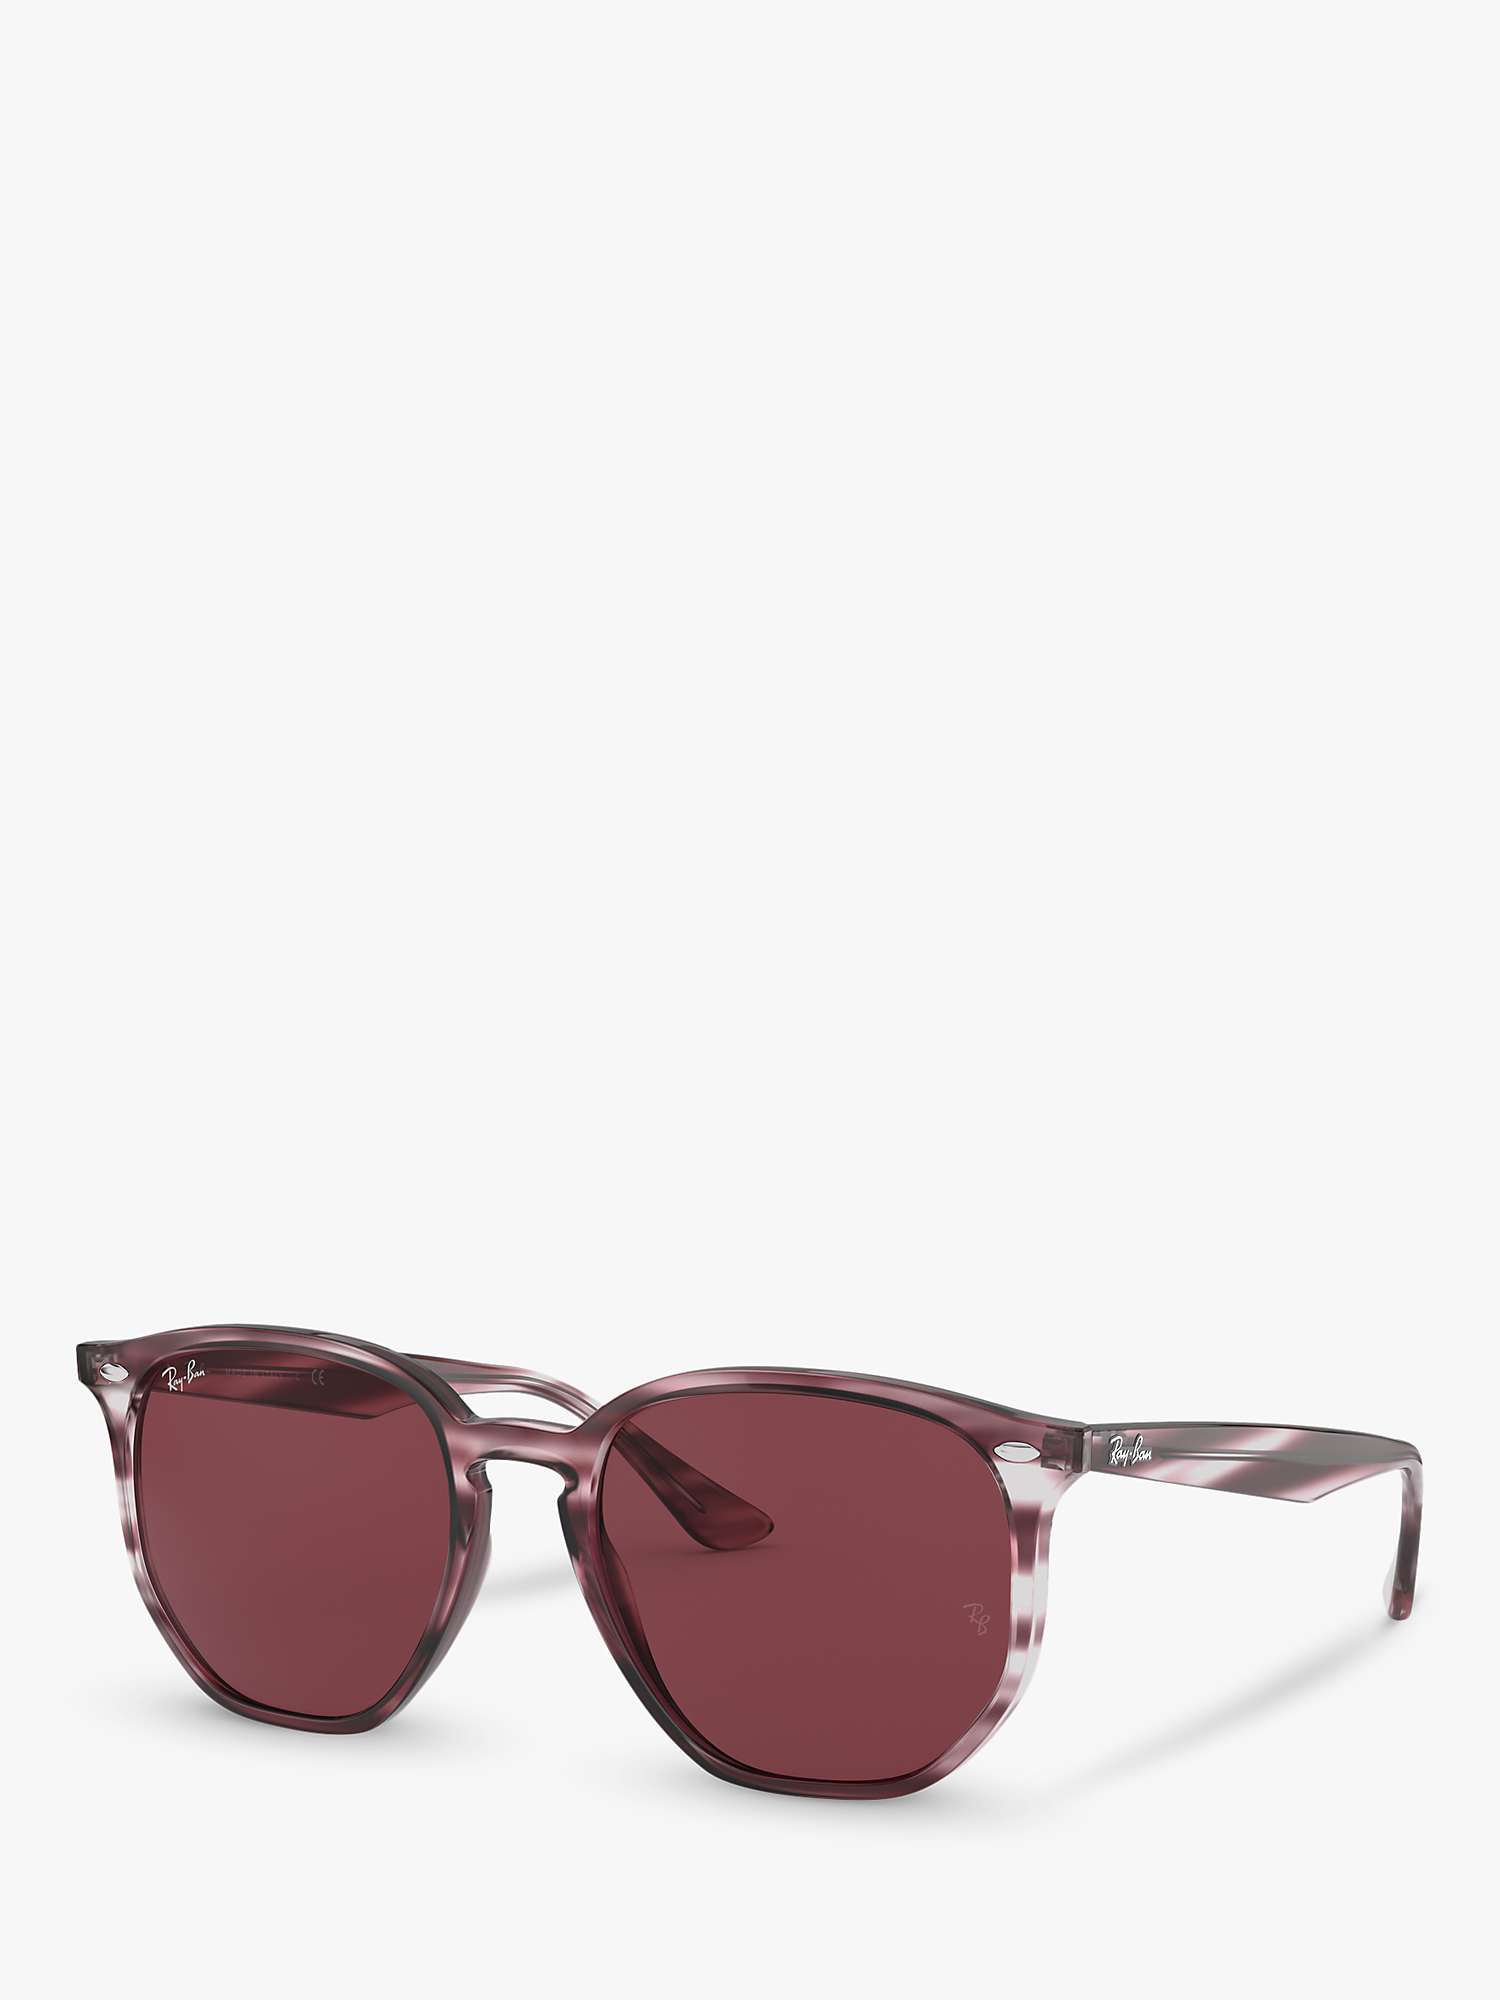 Buy Ray-Ban RB4306 Unisex Oval Sunglasses Online at johnlewis.com